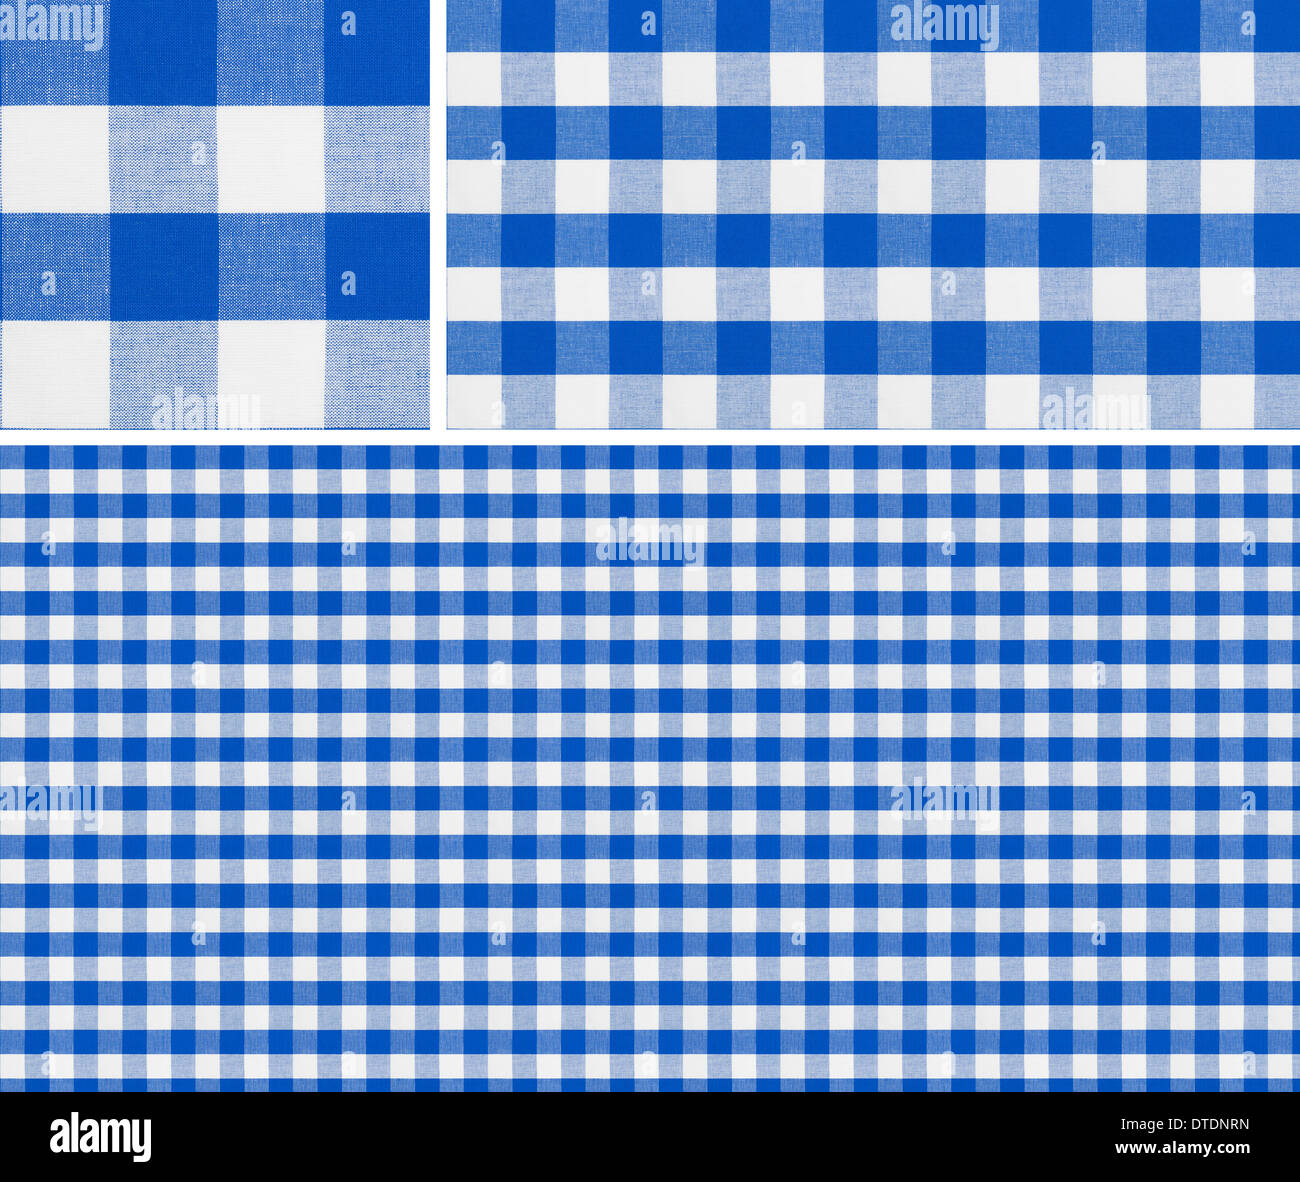 Seamless picnic table cloth pattern 1500x1500 with samples. Good for blue checkered tablecloth creation of any size. Stock Photo